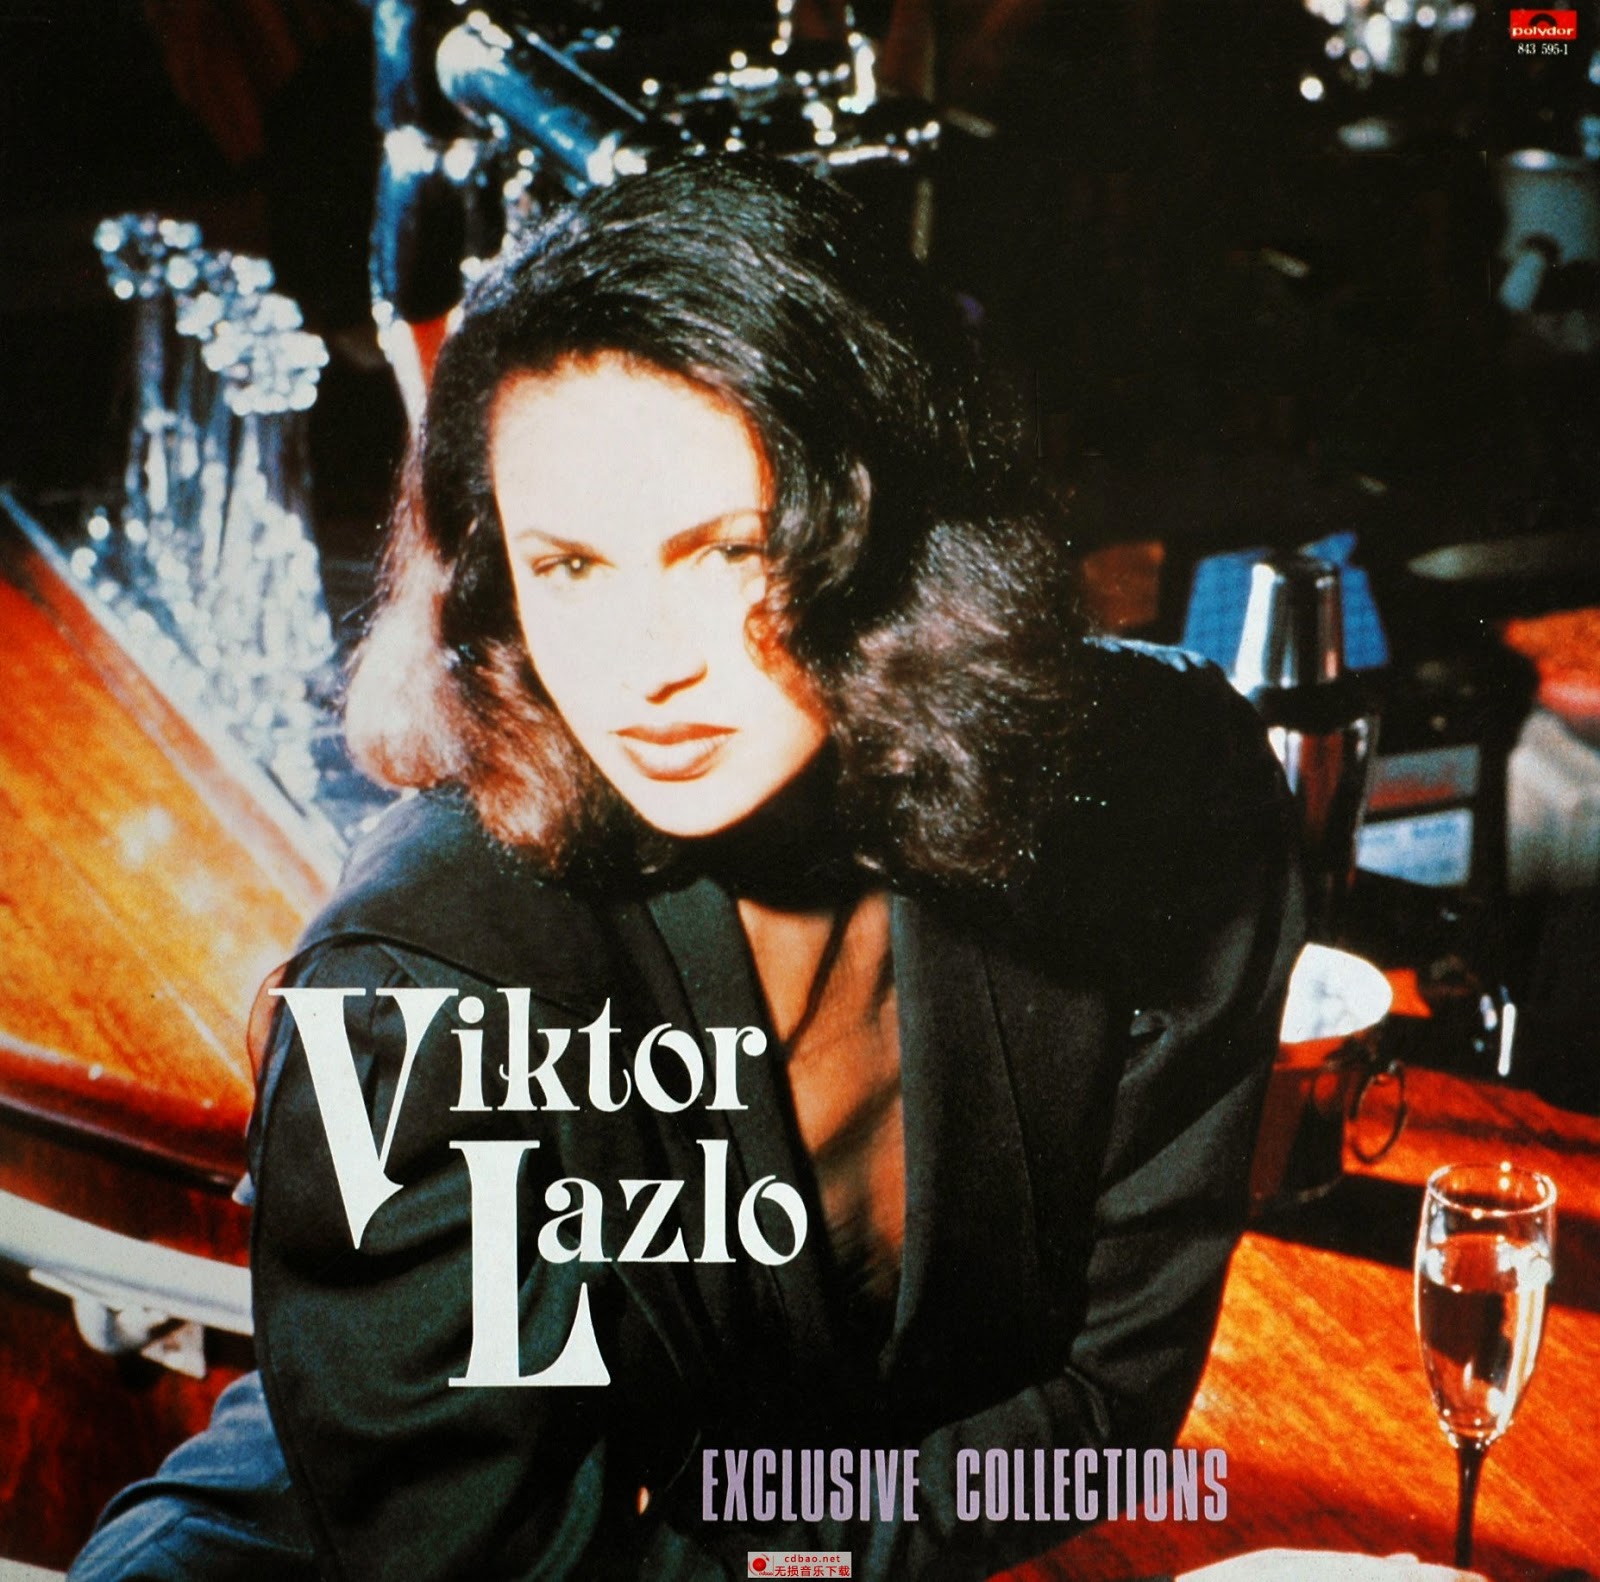 VIKTOR LAZLO - Exclusive Collections cover 